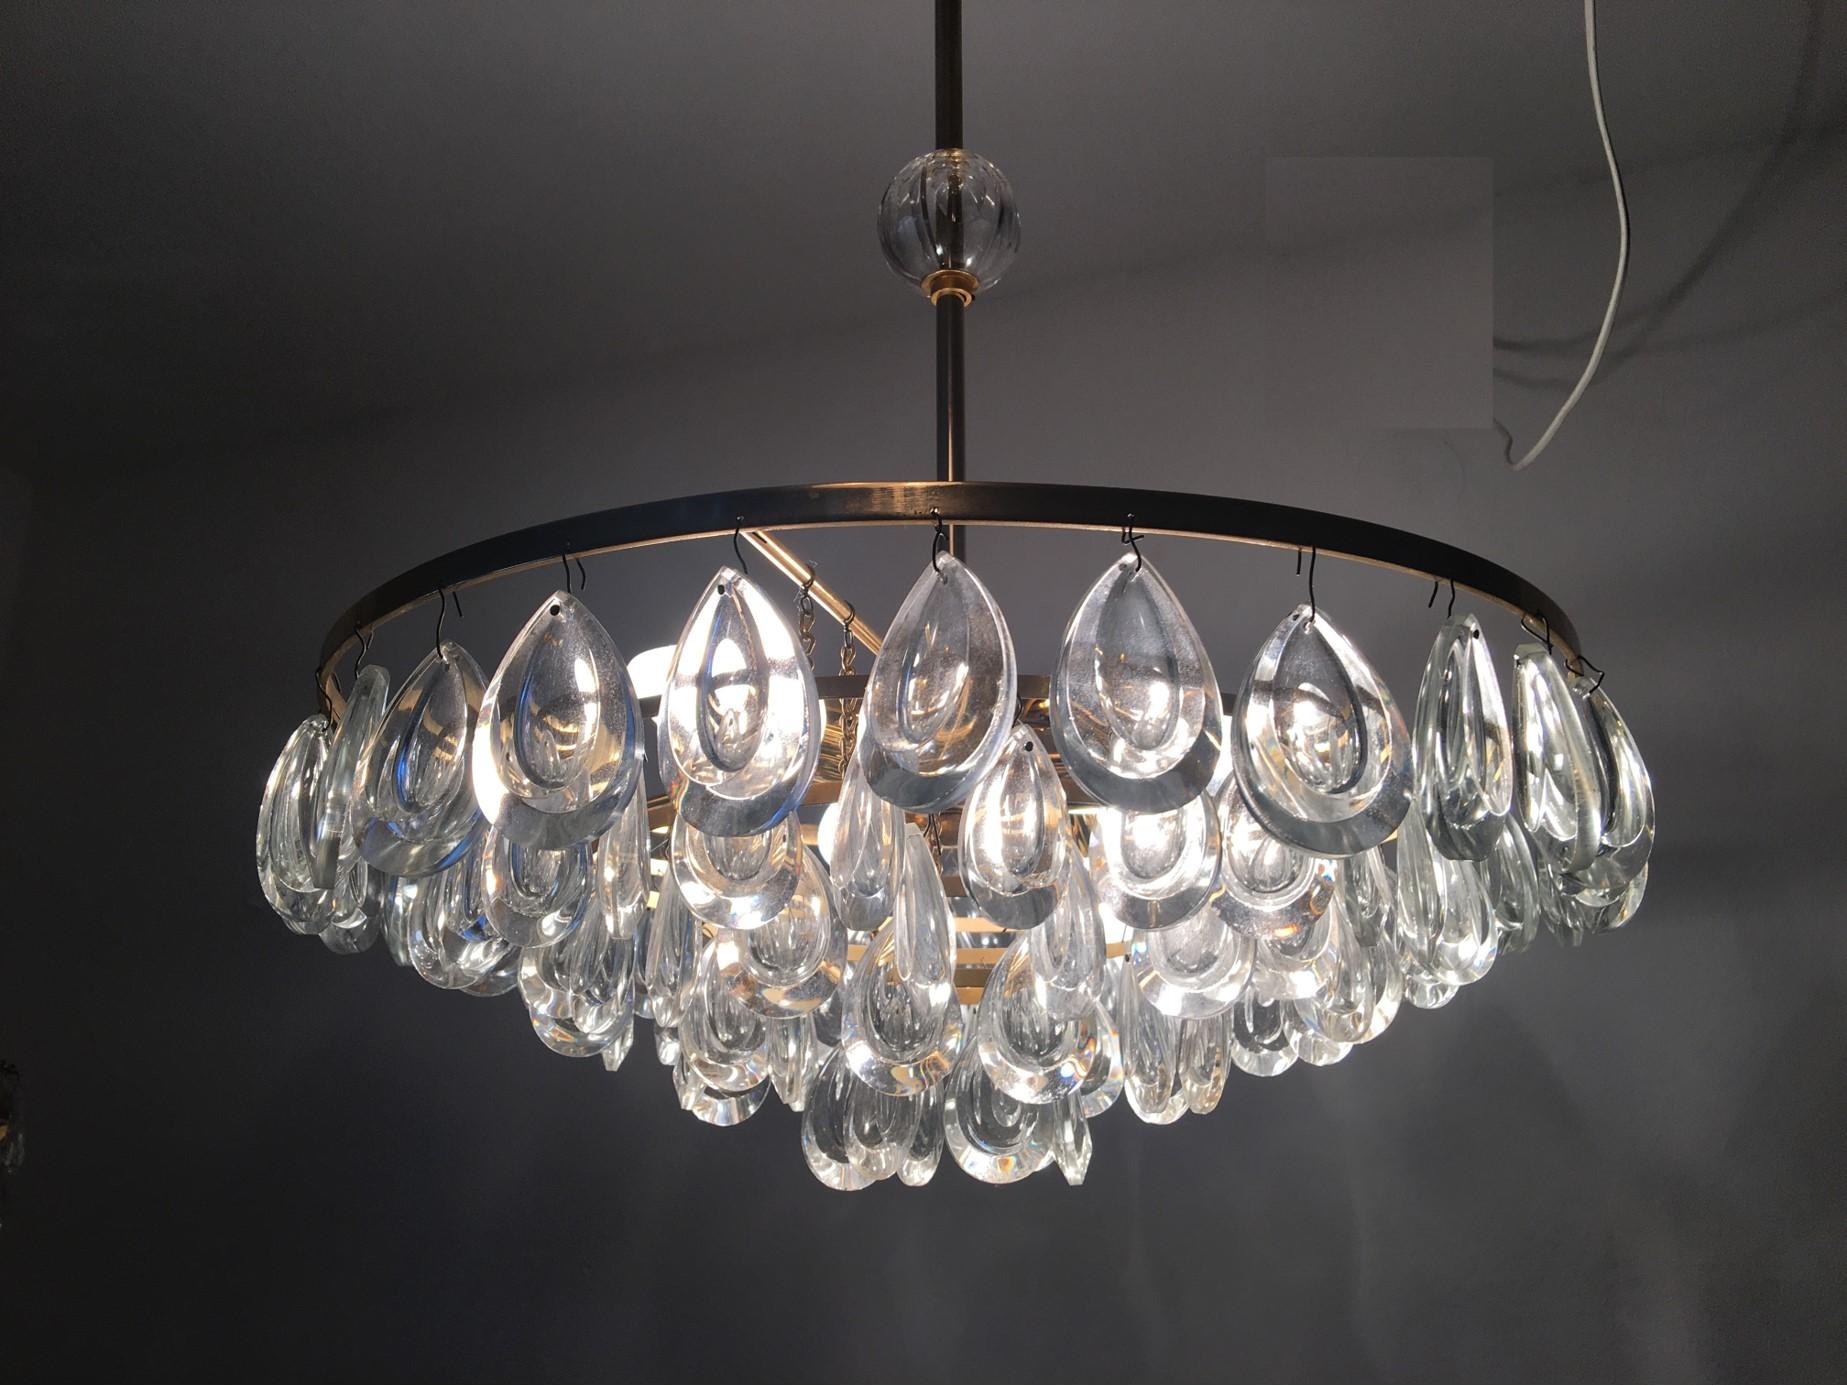 A lovely crystal glass five-tiered drop chandelier by the famous Palwa manufacturer in Germany. In good, working condition. It requires four European E27 Edison bulbs and one E 14 candelabra bulb each up to 40 watts. It is equipped with original